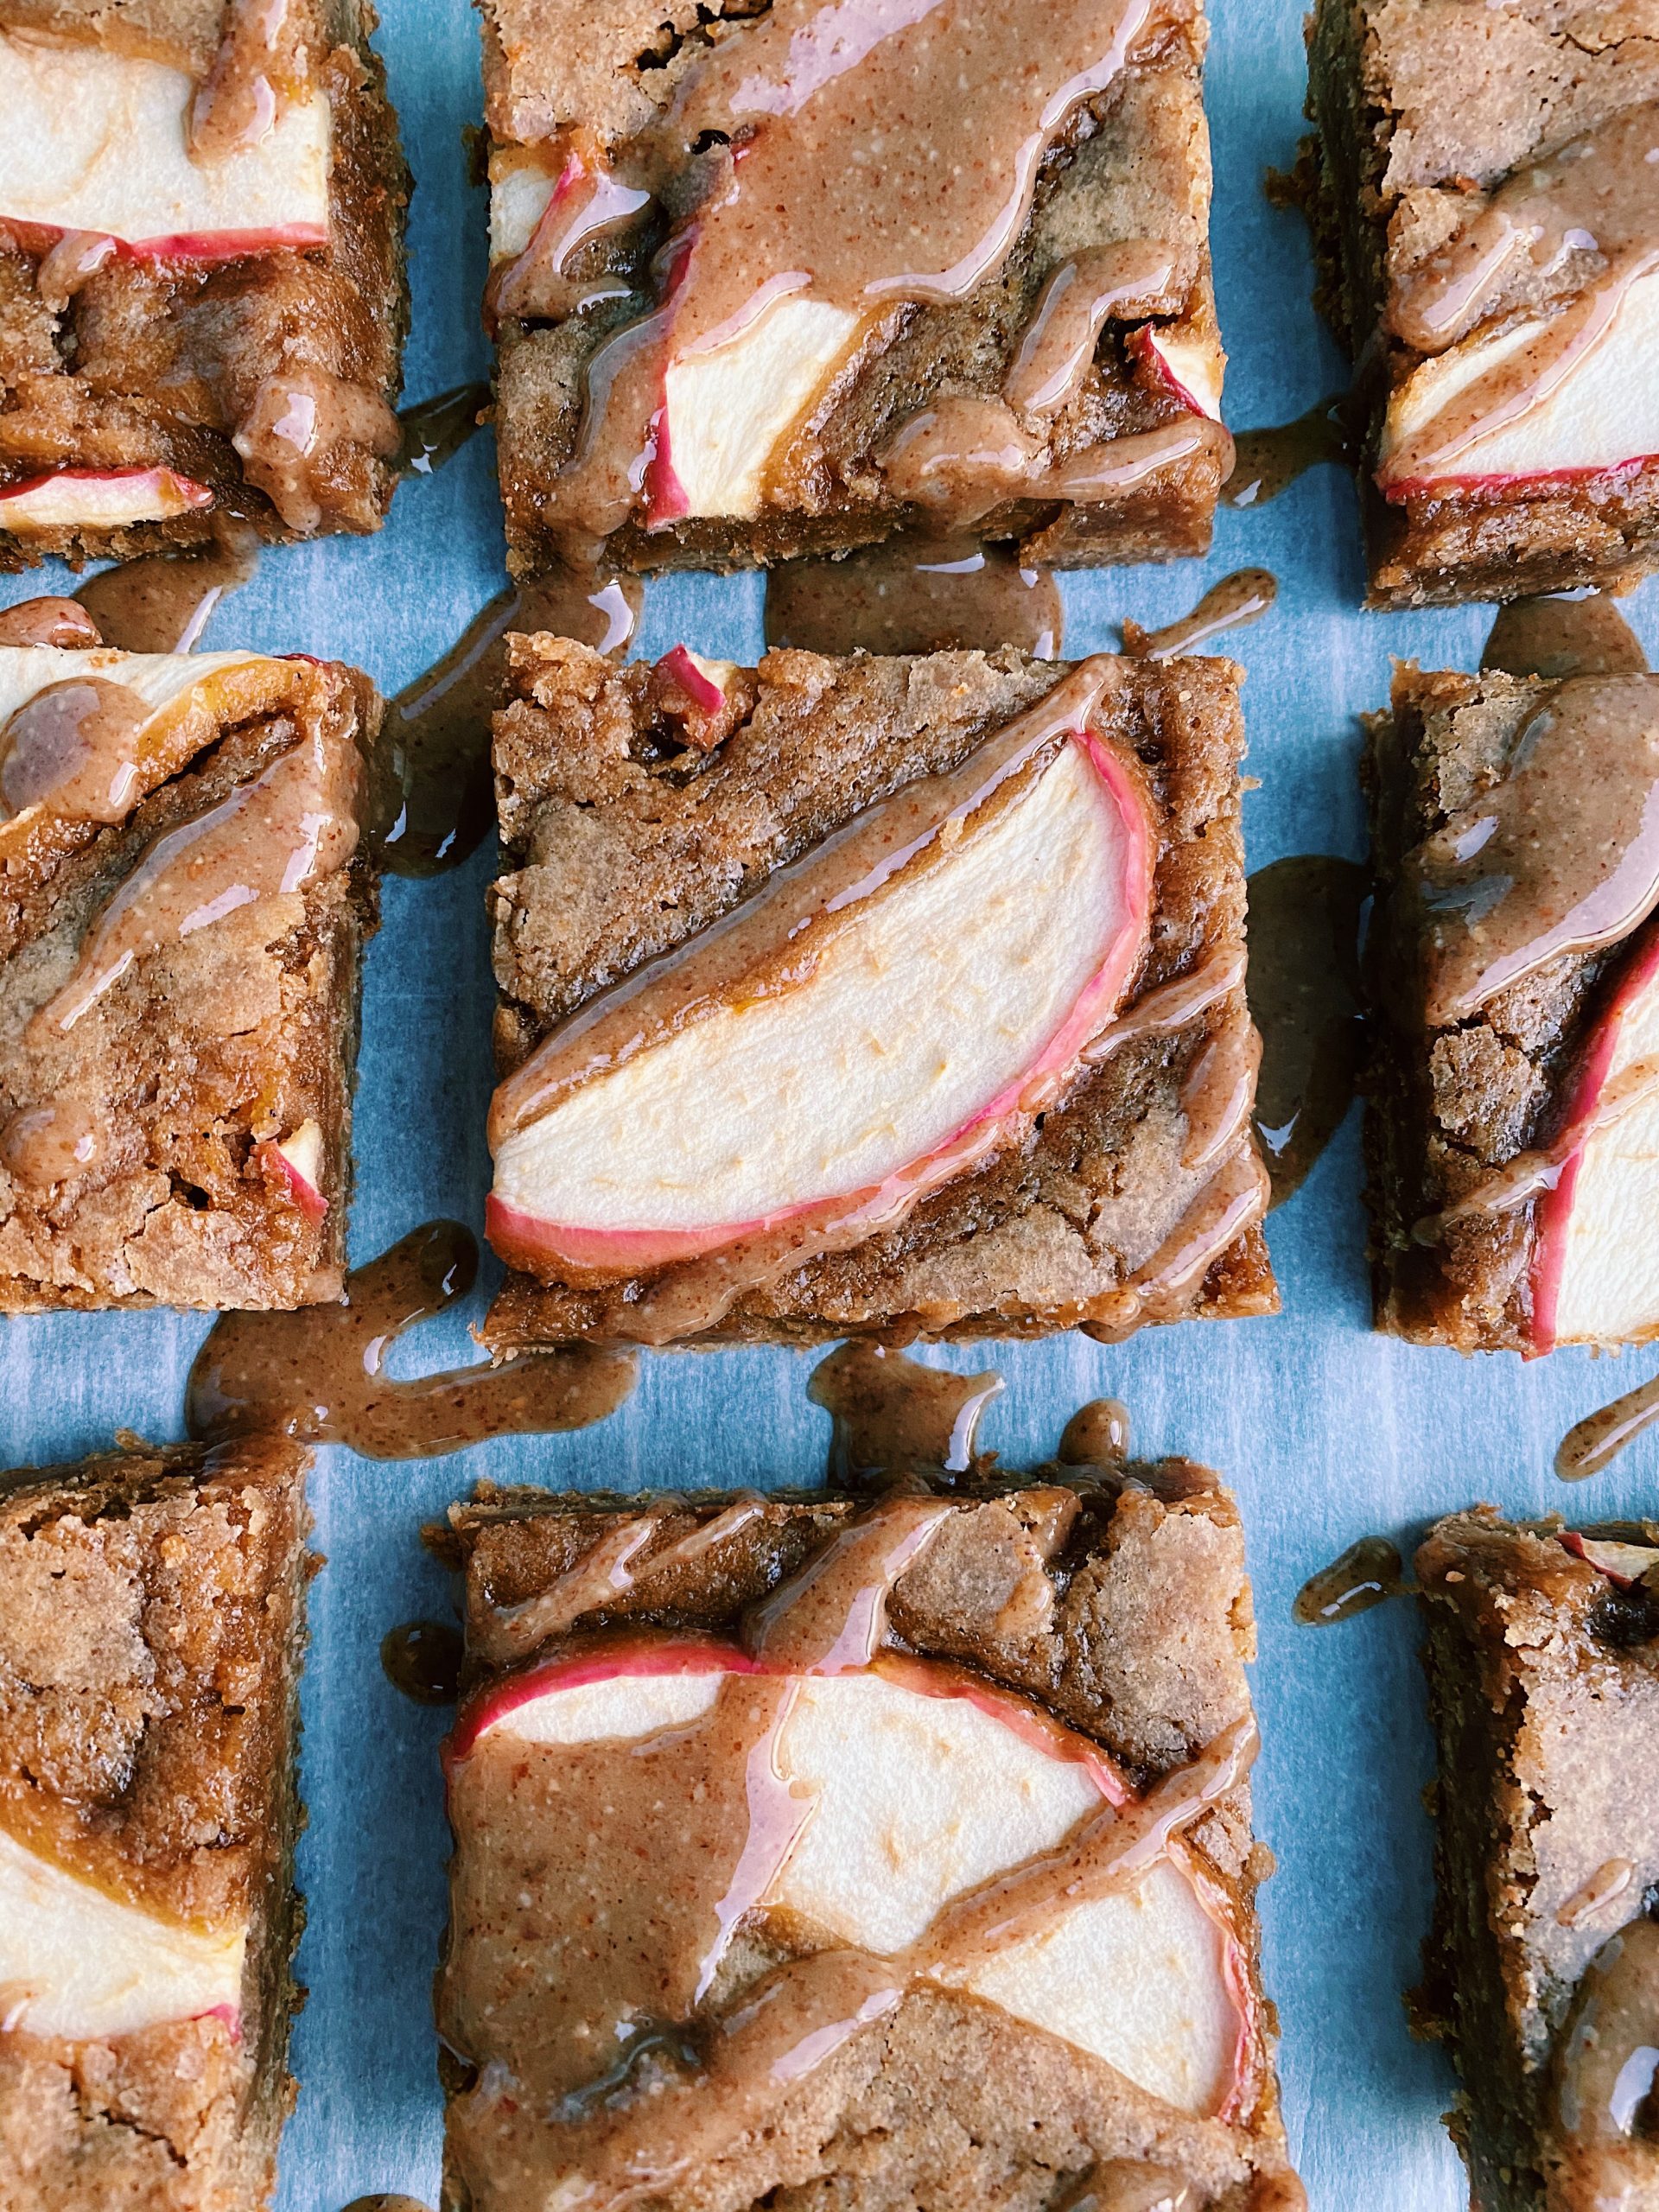 Apple Cinnamon bars cut into squares and drizzled with caramel sauce.